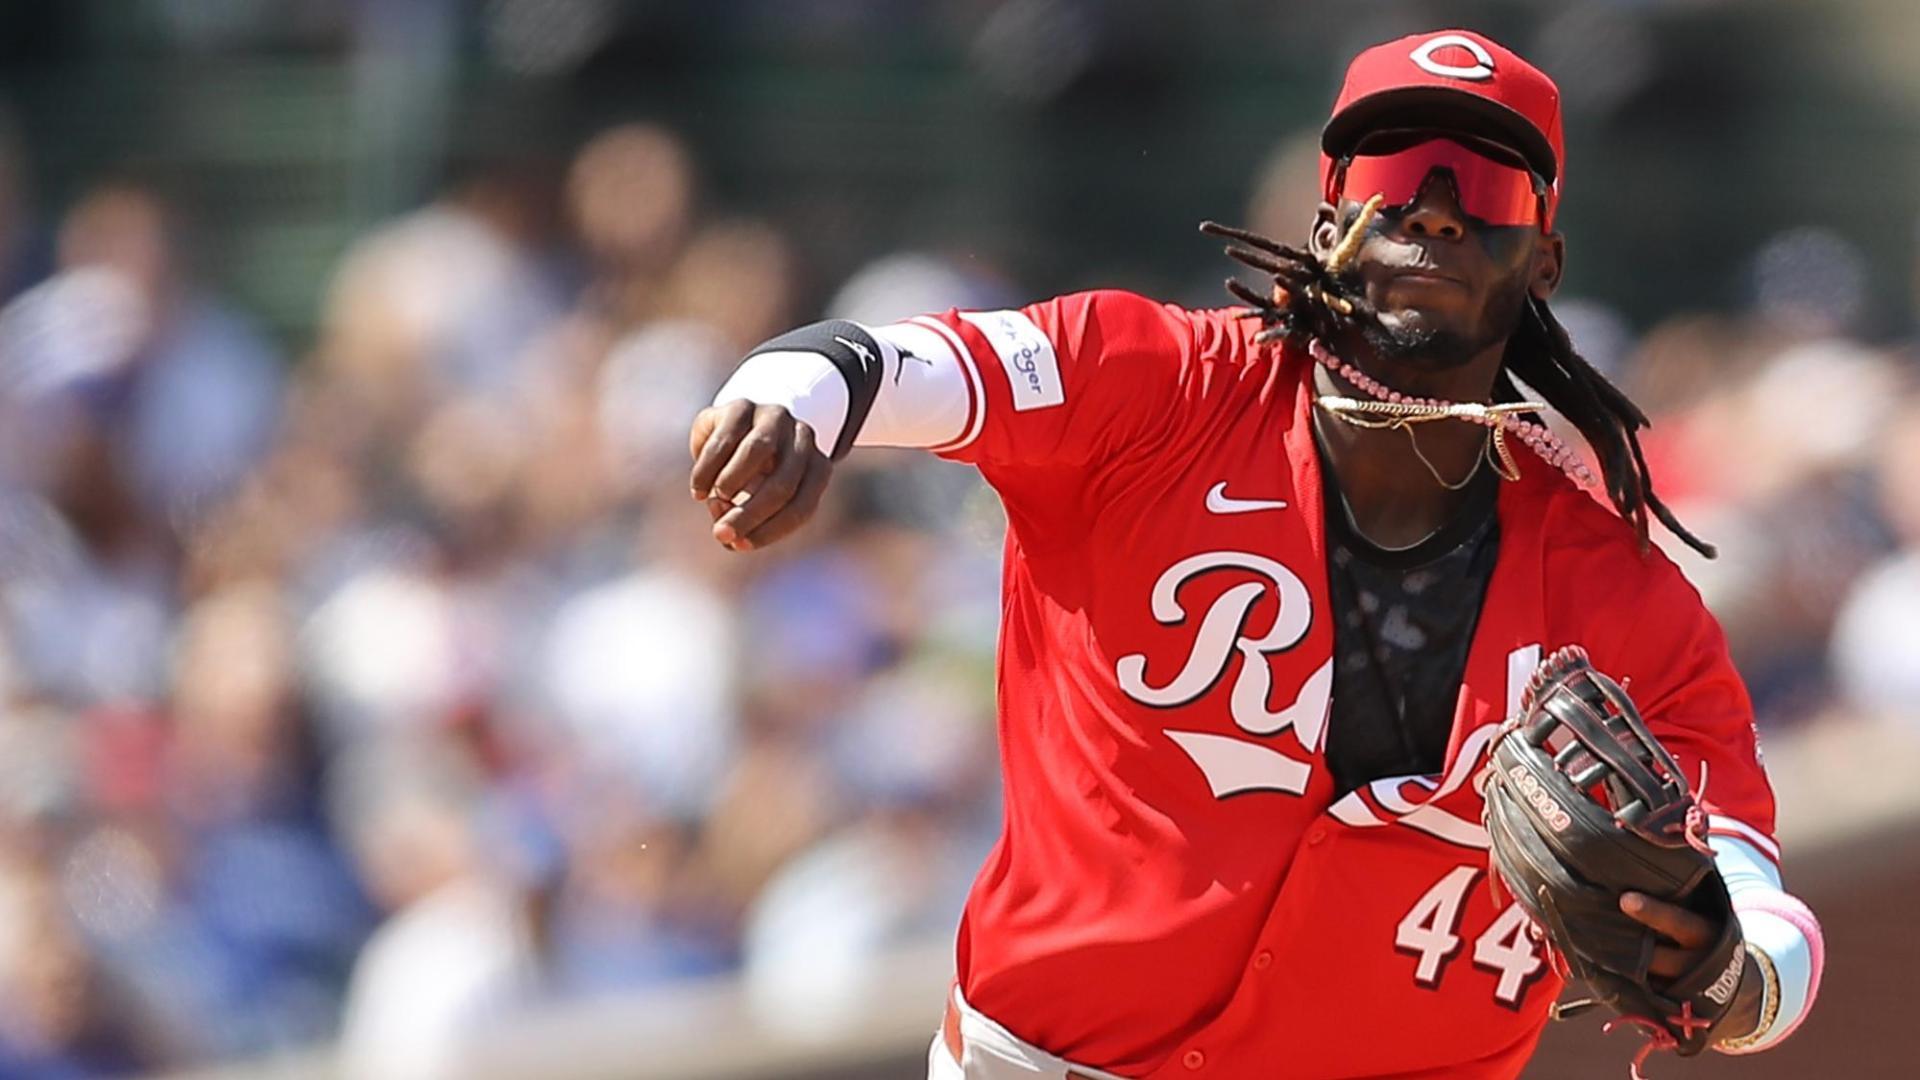 Santiago Espinal hits 2-run homer, Reds hold on to beat Cubs 5-4